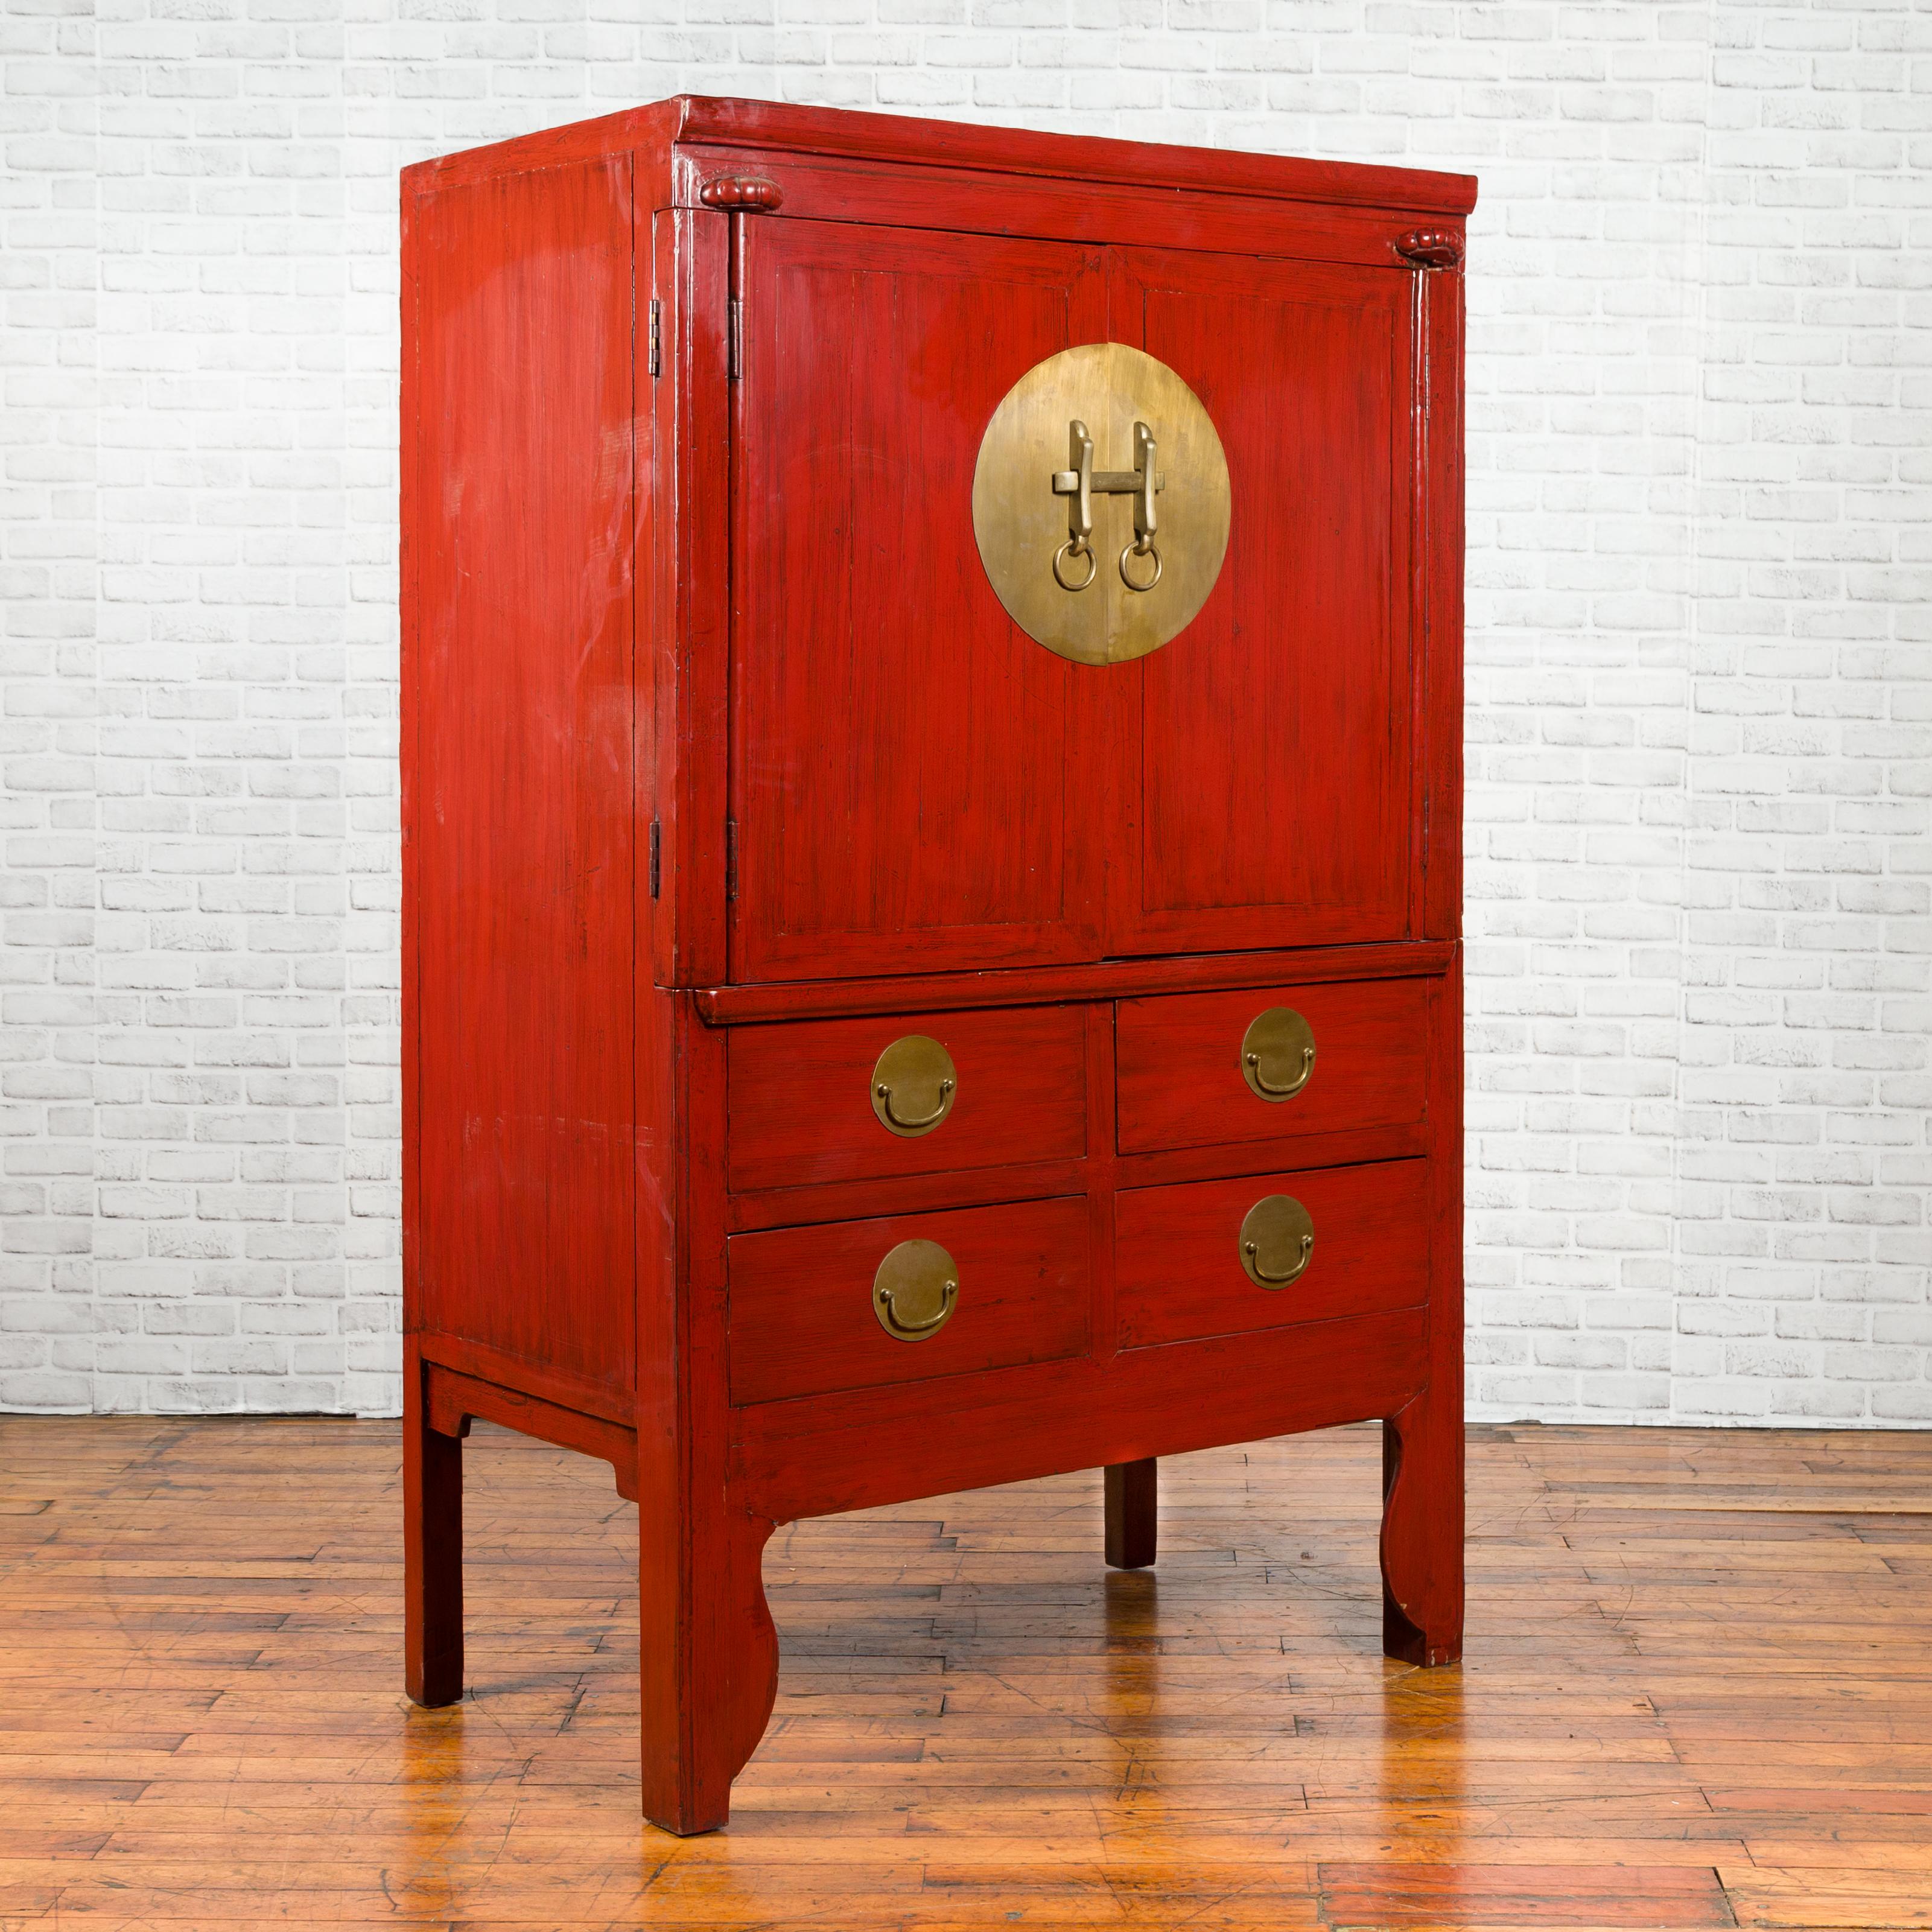 A Northern Chinese Qing Dynasty period red lacquered wedding cabinet from the 19th century, with large brass medallion, two doors and four drawers. Created in Ming Bo (North China) during the Qing Dynasty period, this red cabinet features two upper